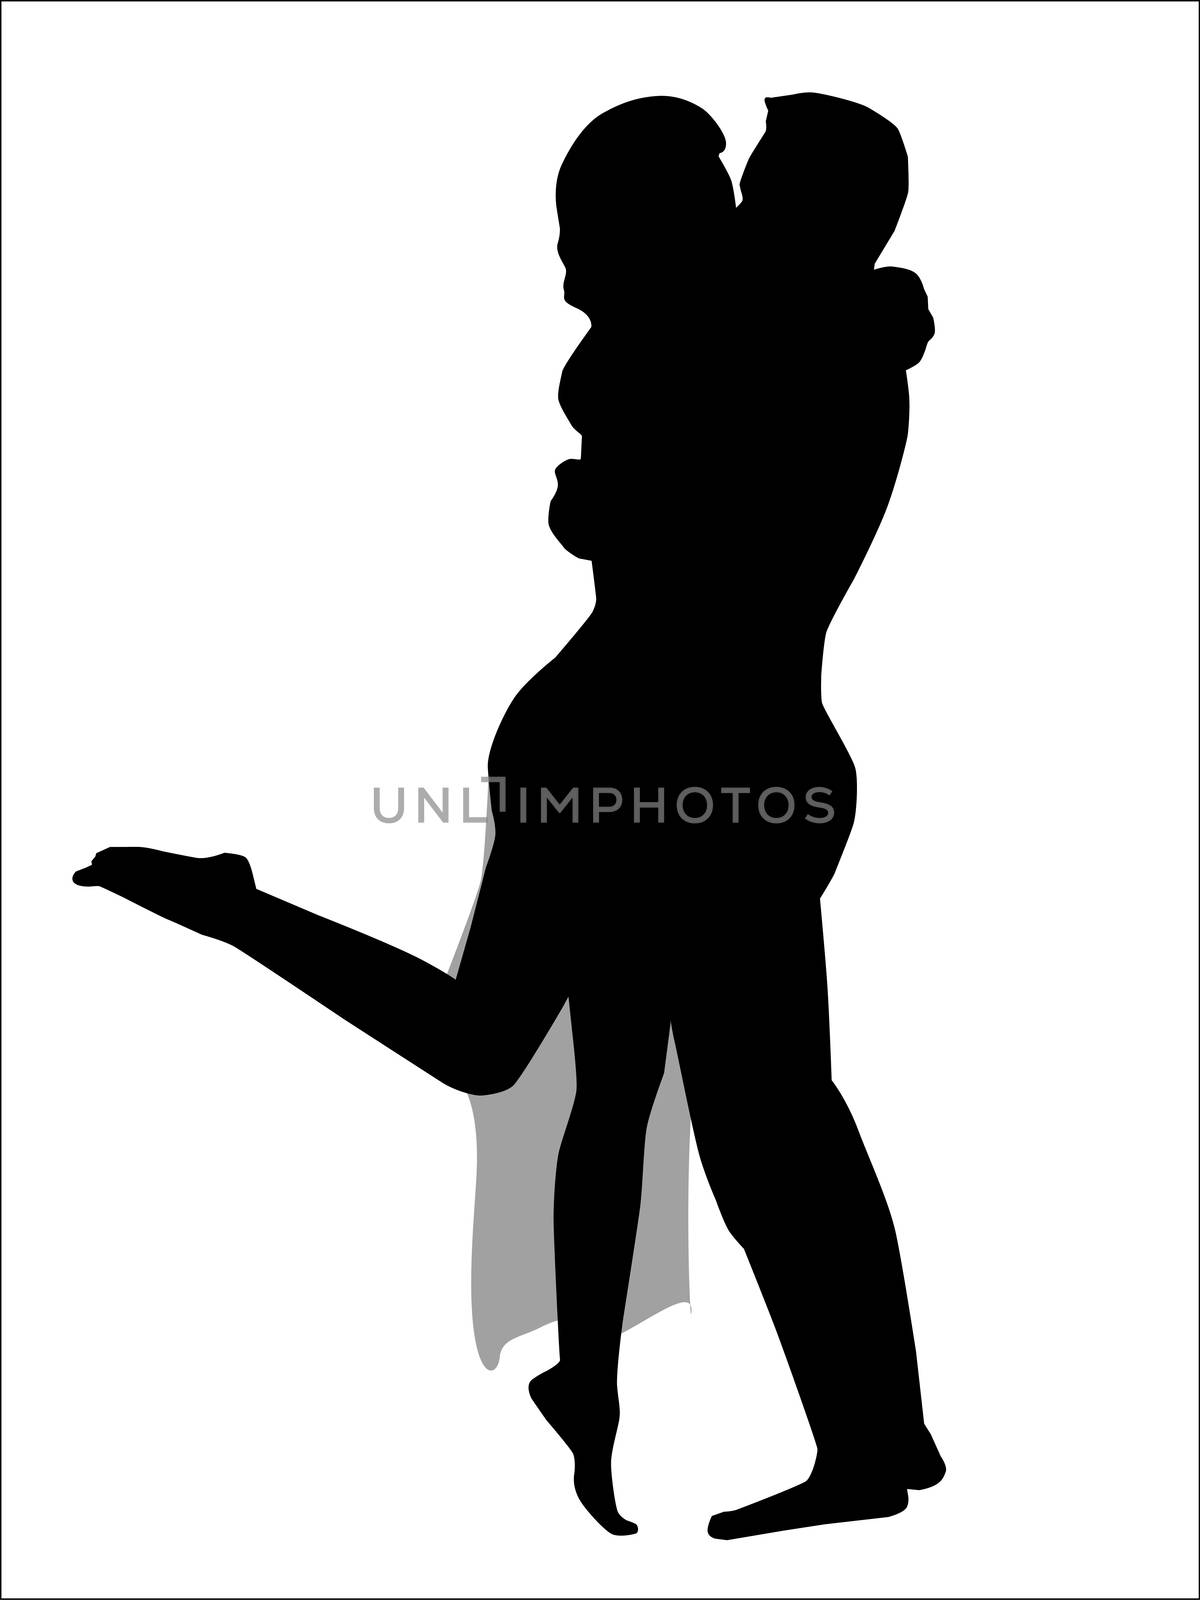 A kissing romantic silhouette couple over a white background.